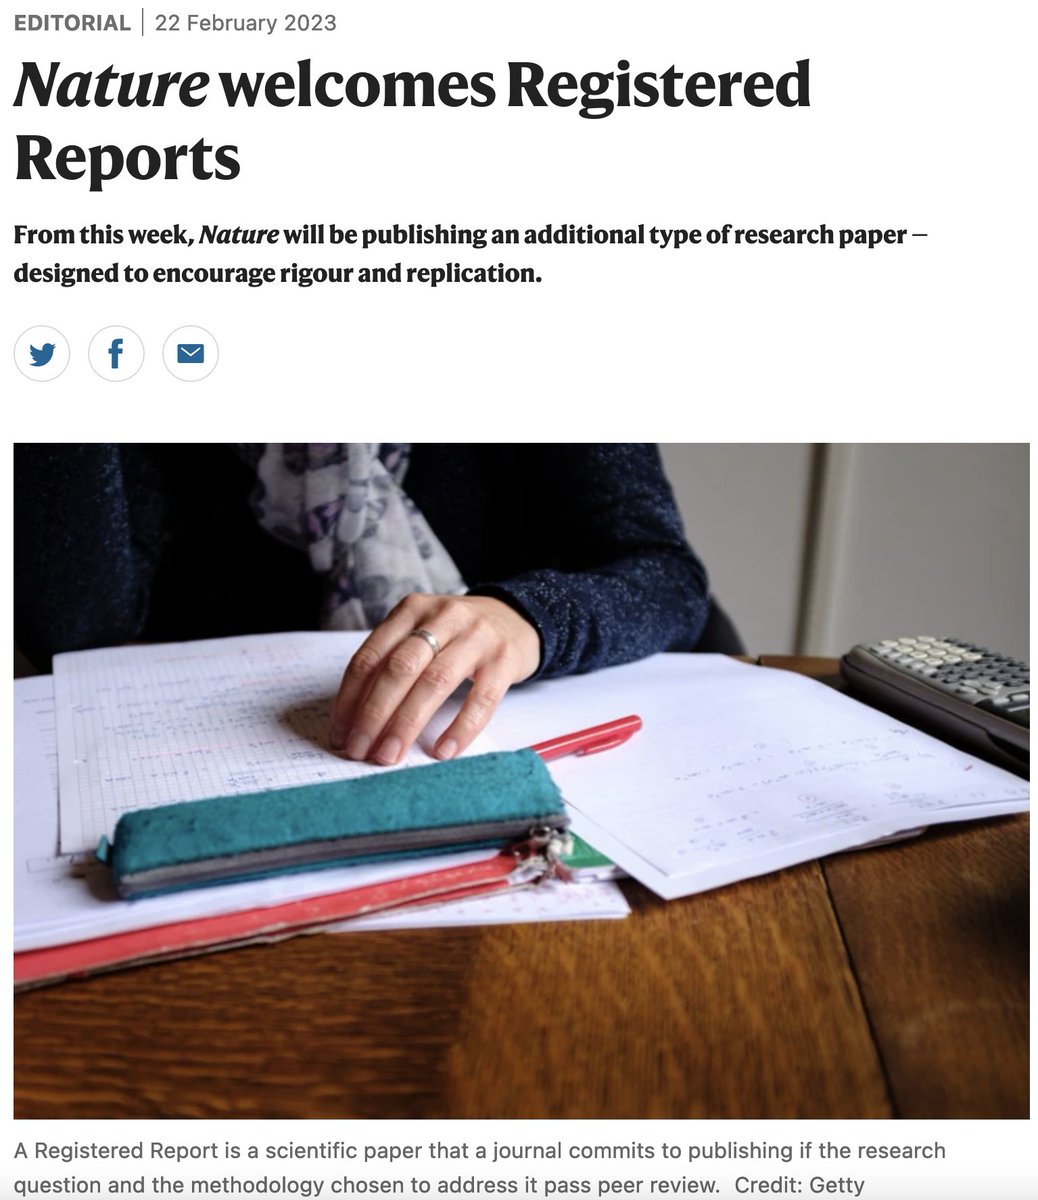 10 years after we created Registered Reports, the thing critics told us would never happen has happened: @Nature is offering them Congratulations @Magda_Skipper & team. The @RegReports initiative just went up a gear and we are one step closer to eradicating publication bias.